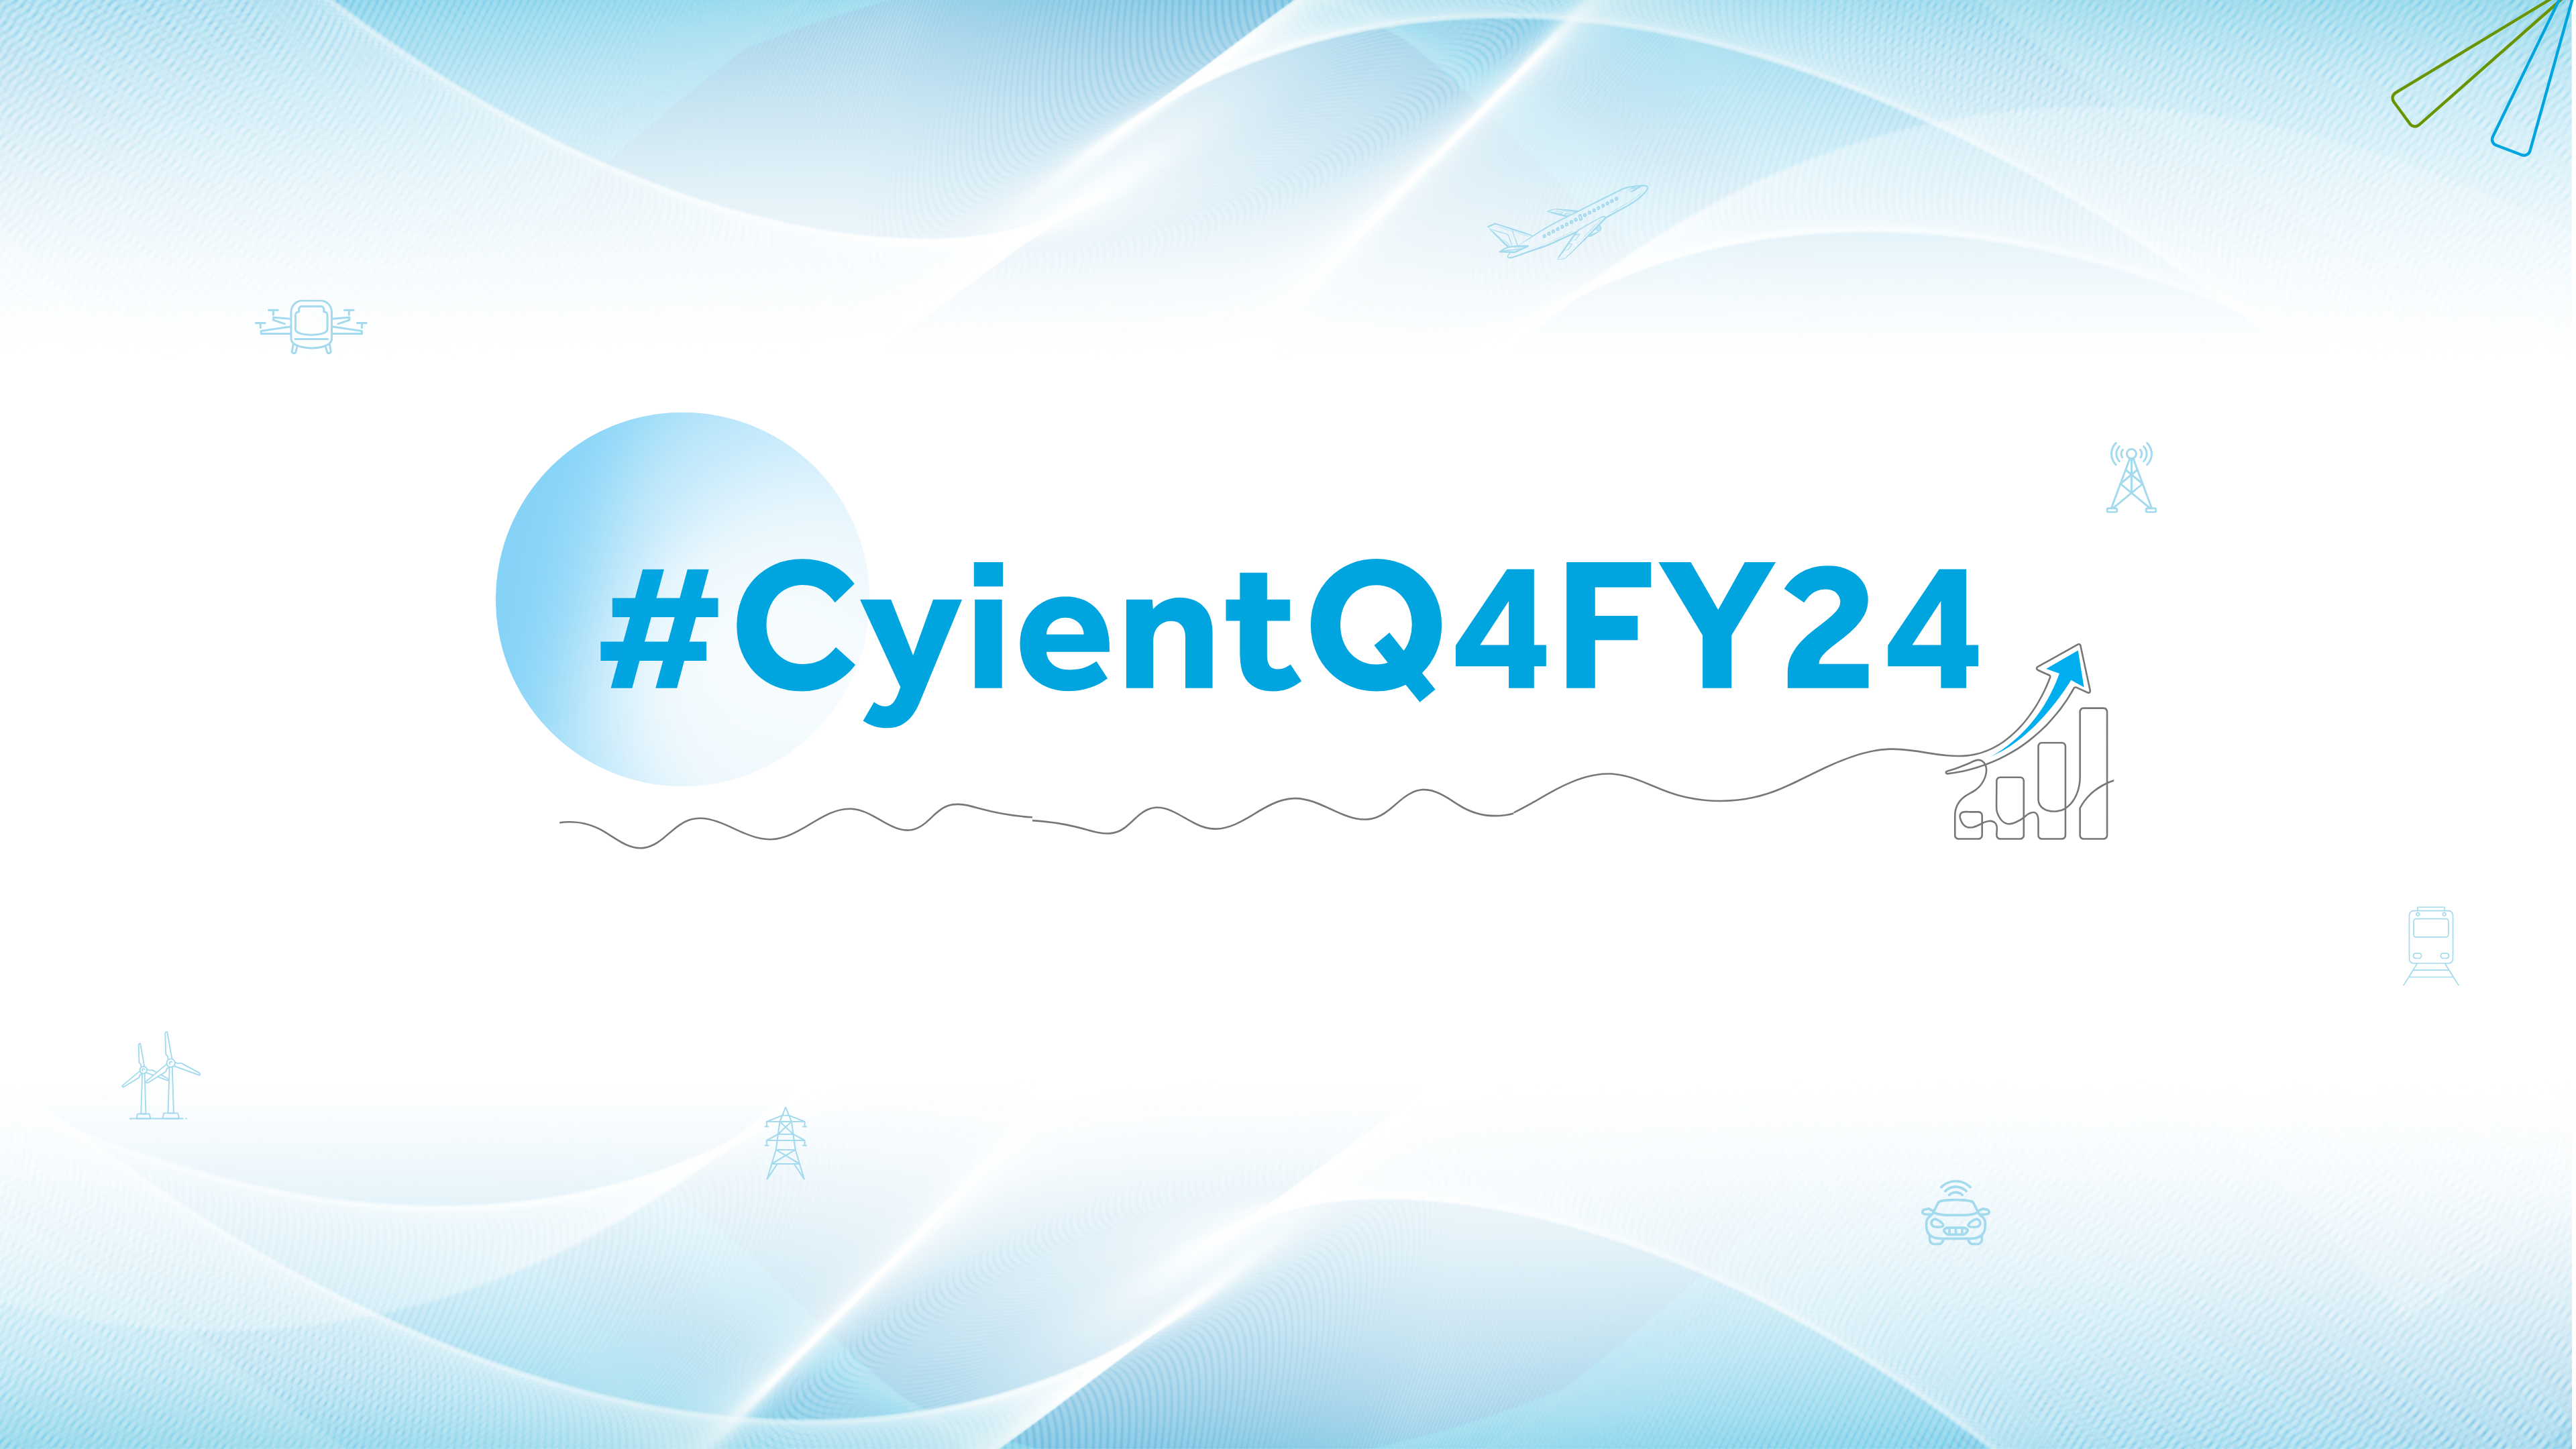 Cyient Announces Impressive Q4 and Annual FY24 Results, Driven by Intelligent Engineering and Technology Solutions